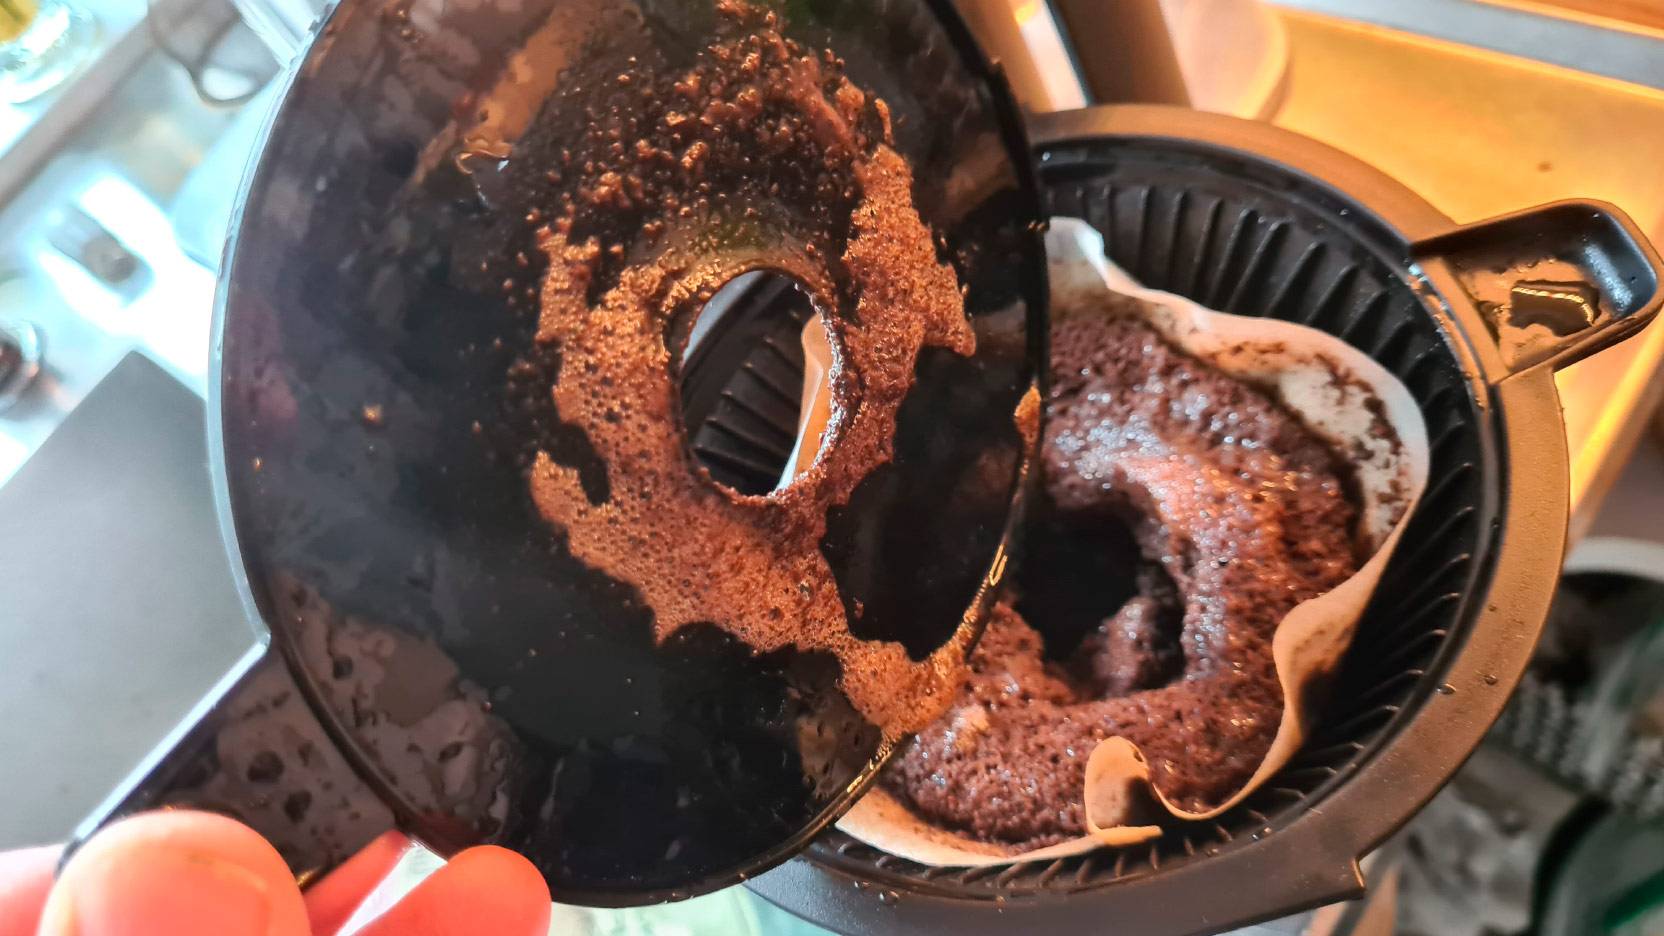 Image of coffee grounds under the lid of the filter holder